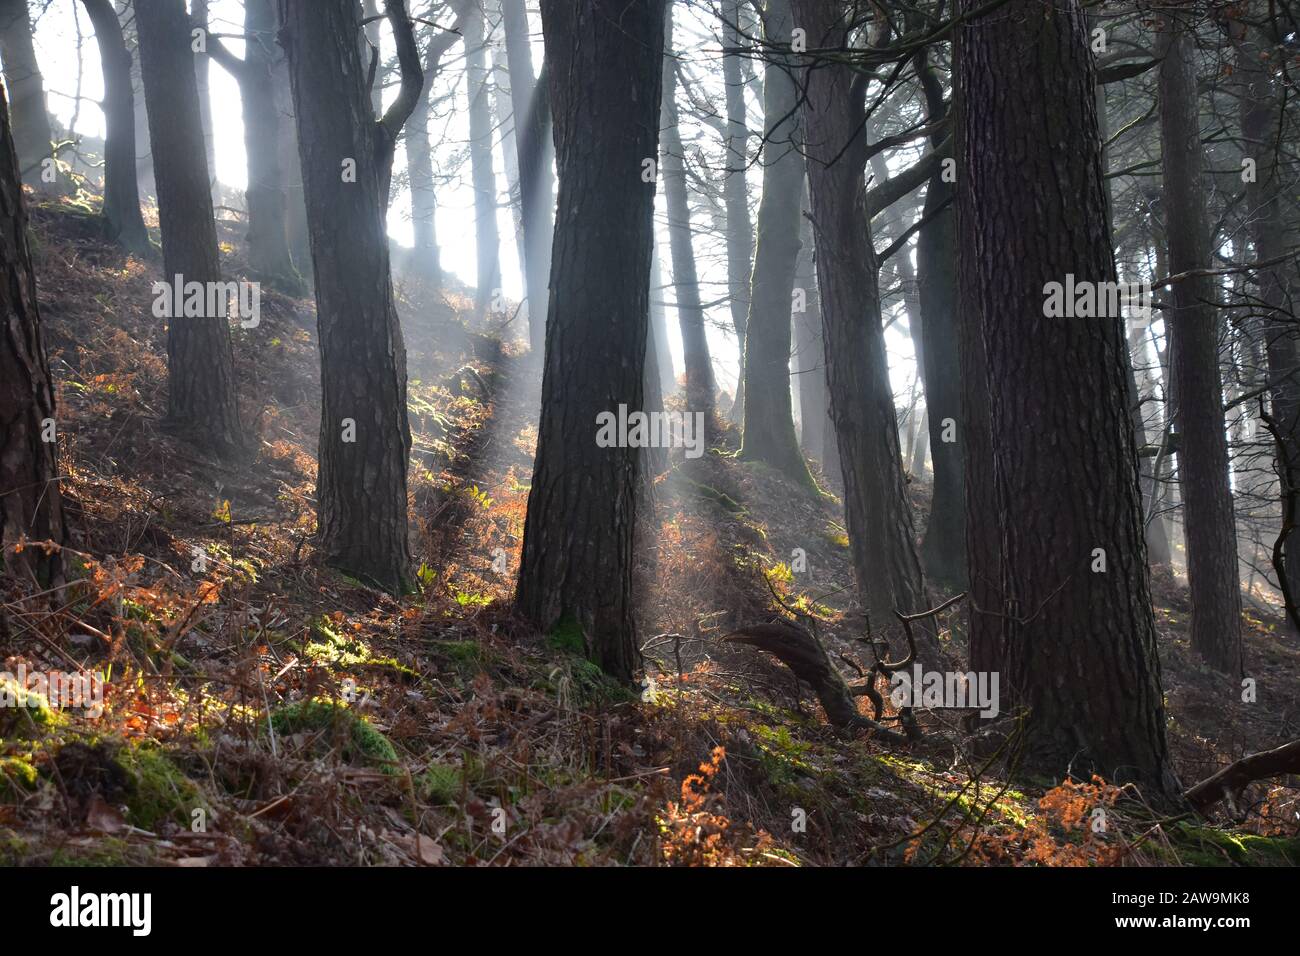 Fairy Tale Woods, Enchanted Forest, Trees in sunlight, Hardcastle Crags, Hebden Bridge, Pennines, West Yorkshire Stock Photo